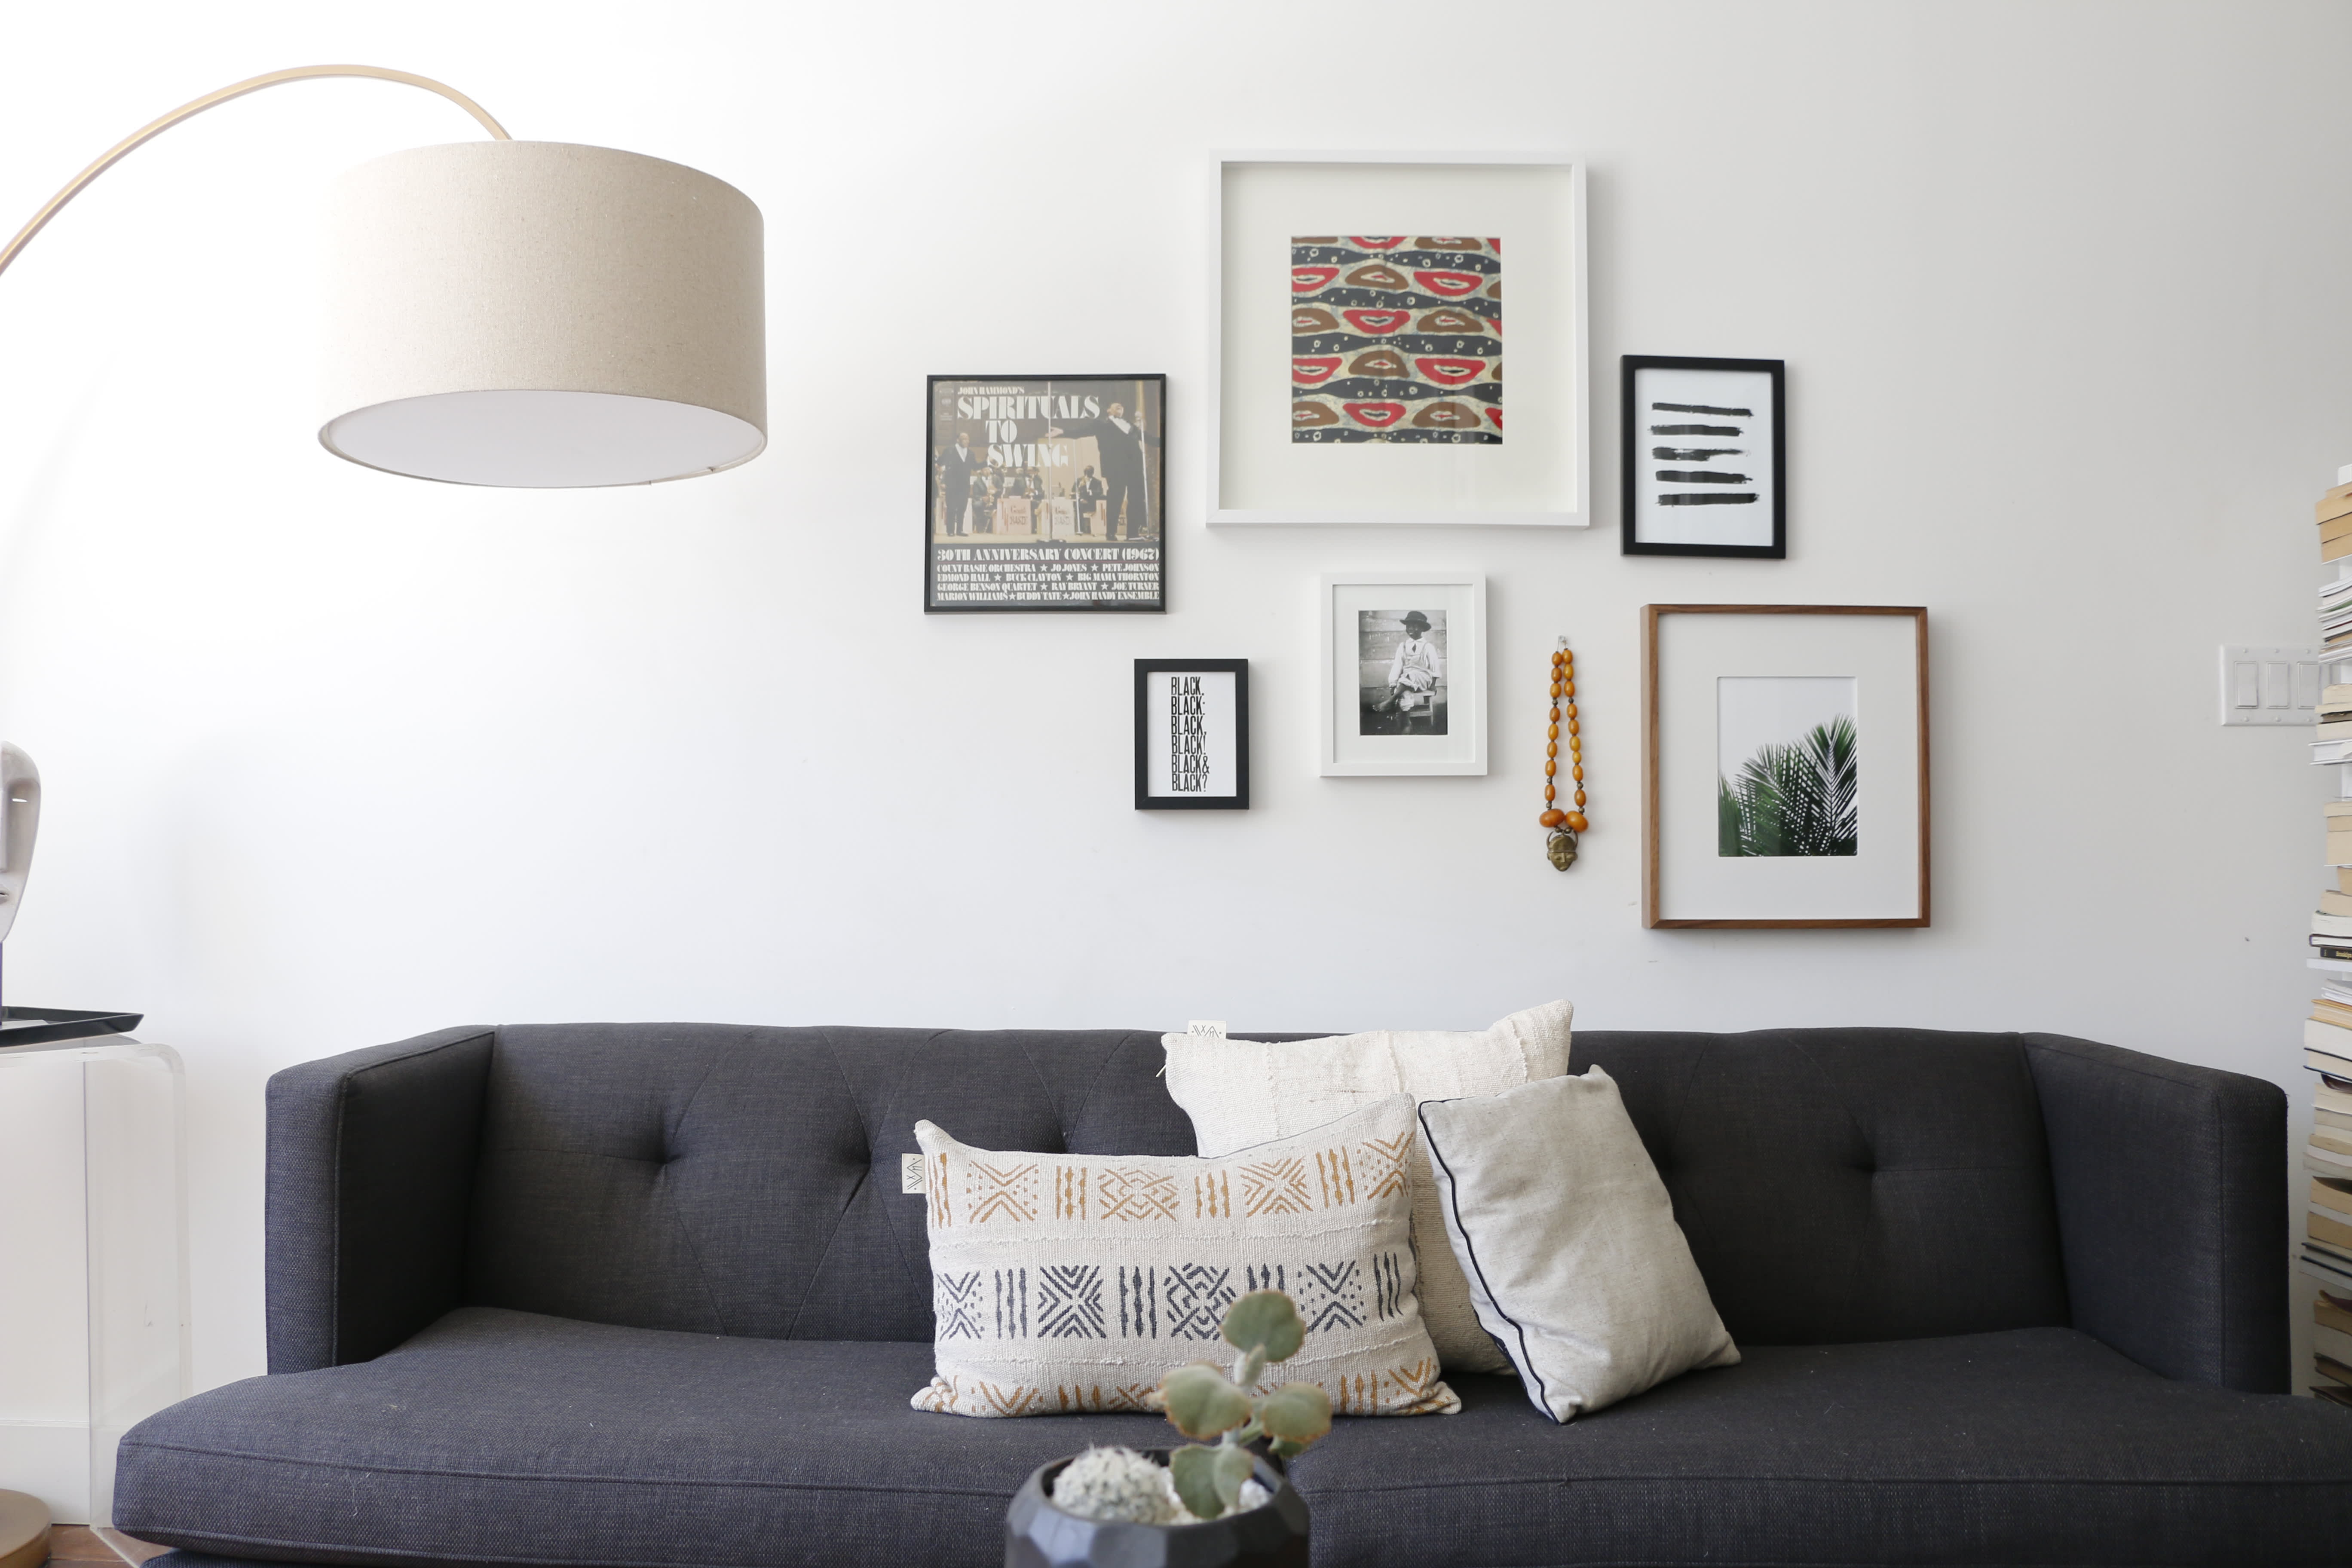 How High Should You Hang Pictures Over A Sofa | Baci ...